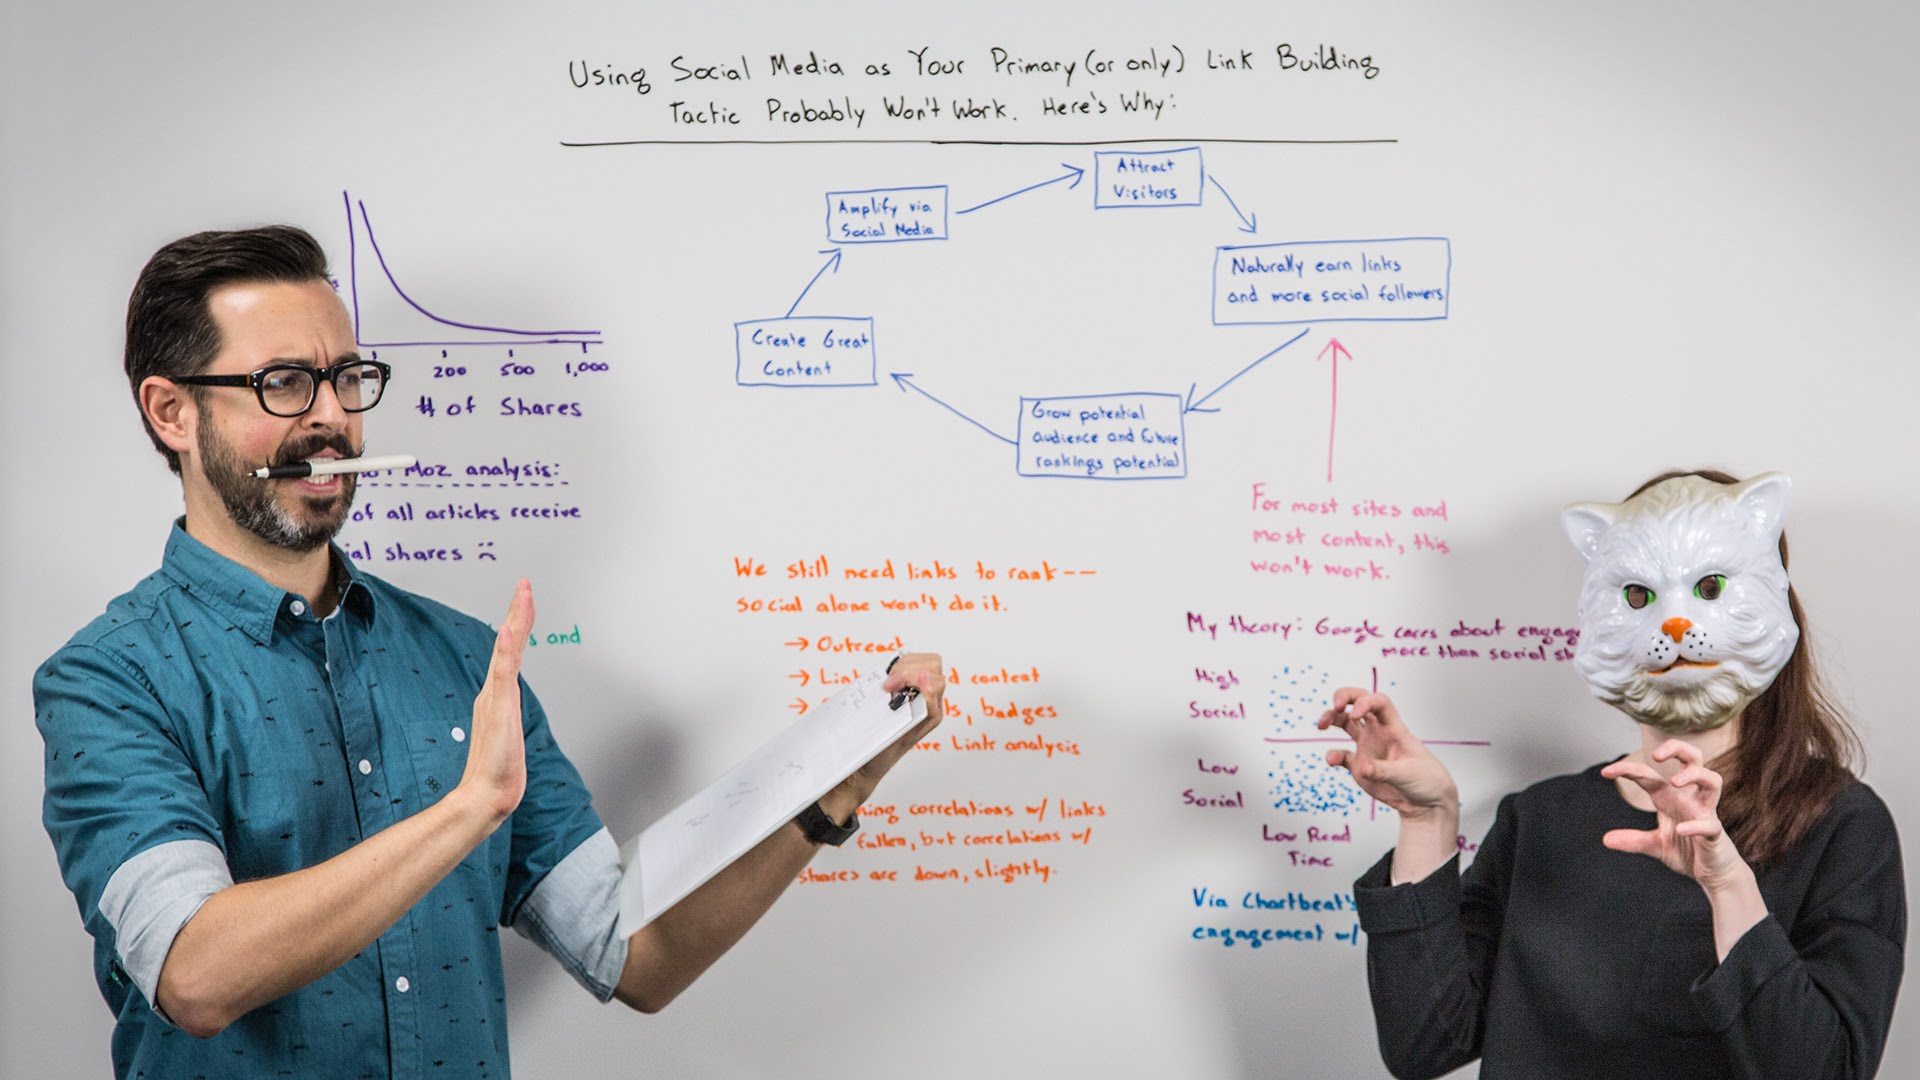 Using Social Media as Your Primary Link Building Tactic Probably Won't Work – Whiteboard Friday